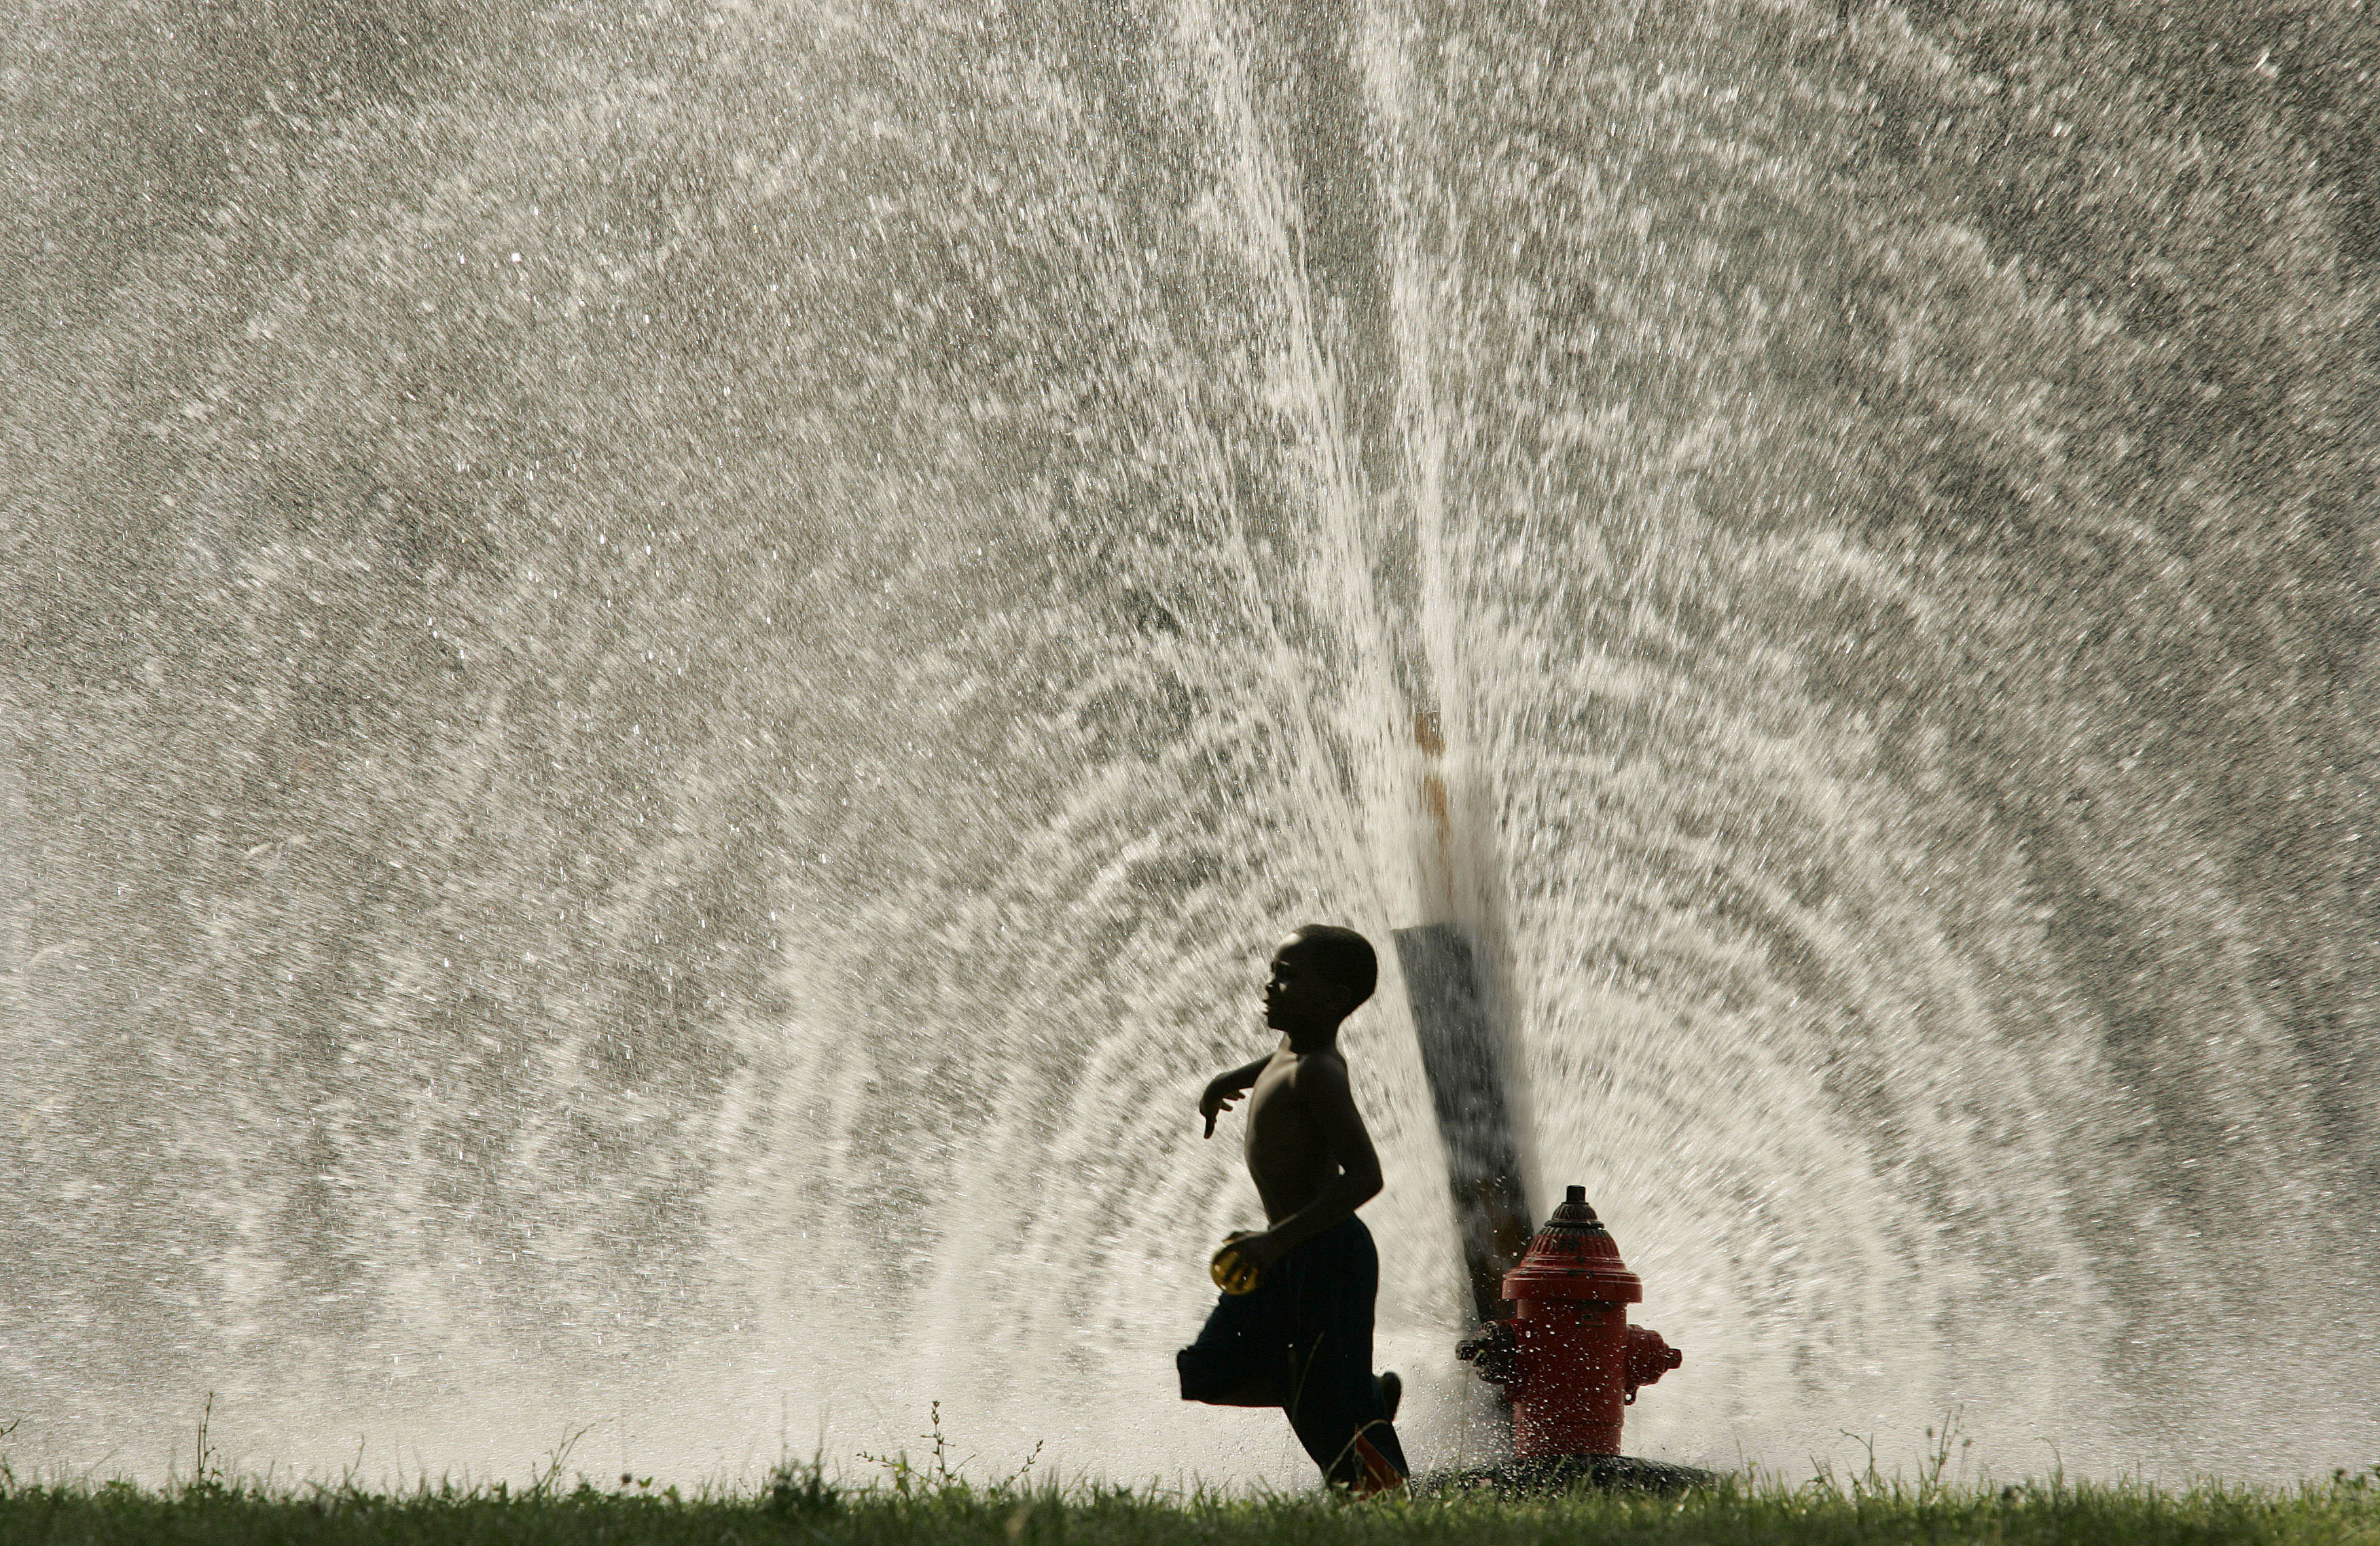 Photo by Al Fredrickson: Boy prances through summer fire hydrant spray.   Light crystallizes magically through a water cascade   “A boy runs past spray from an illegally opened fire hydrant in Milwaukee, Wisconsin as people seek relief from a heat wave.